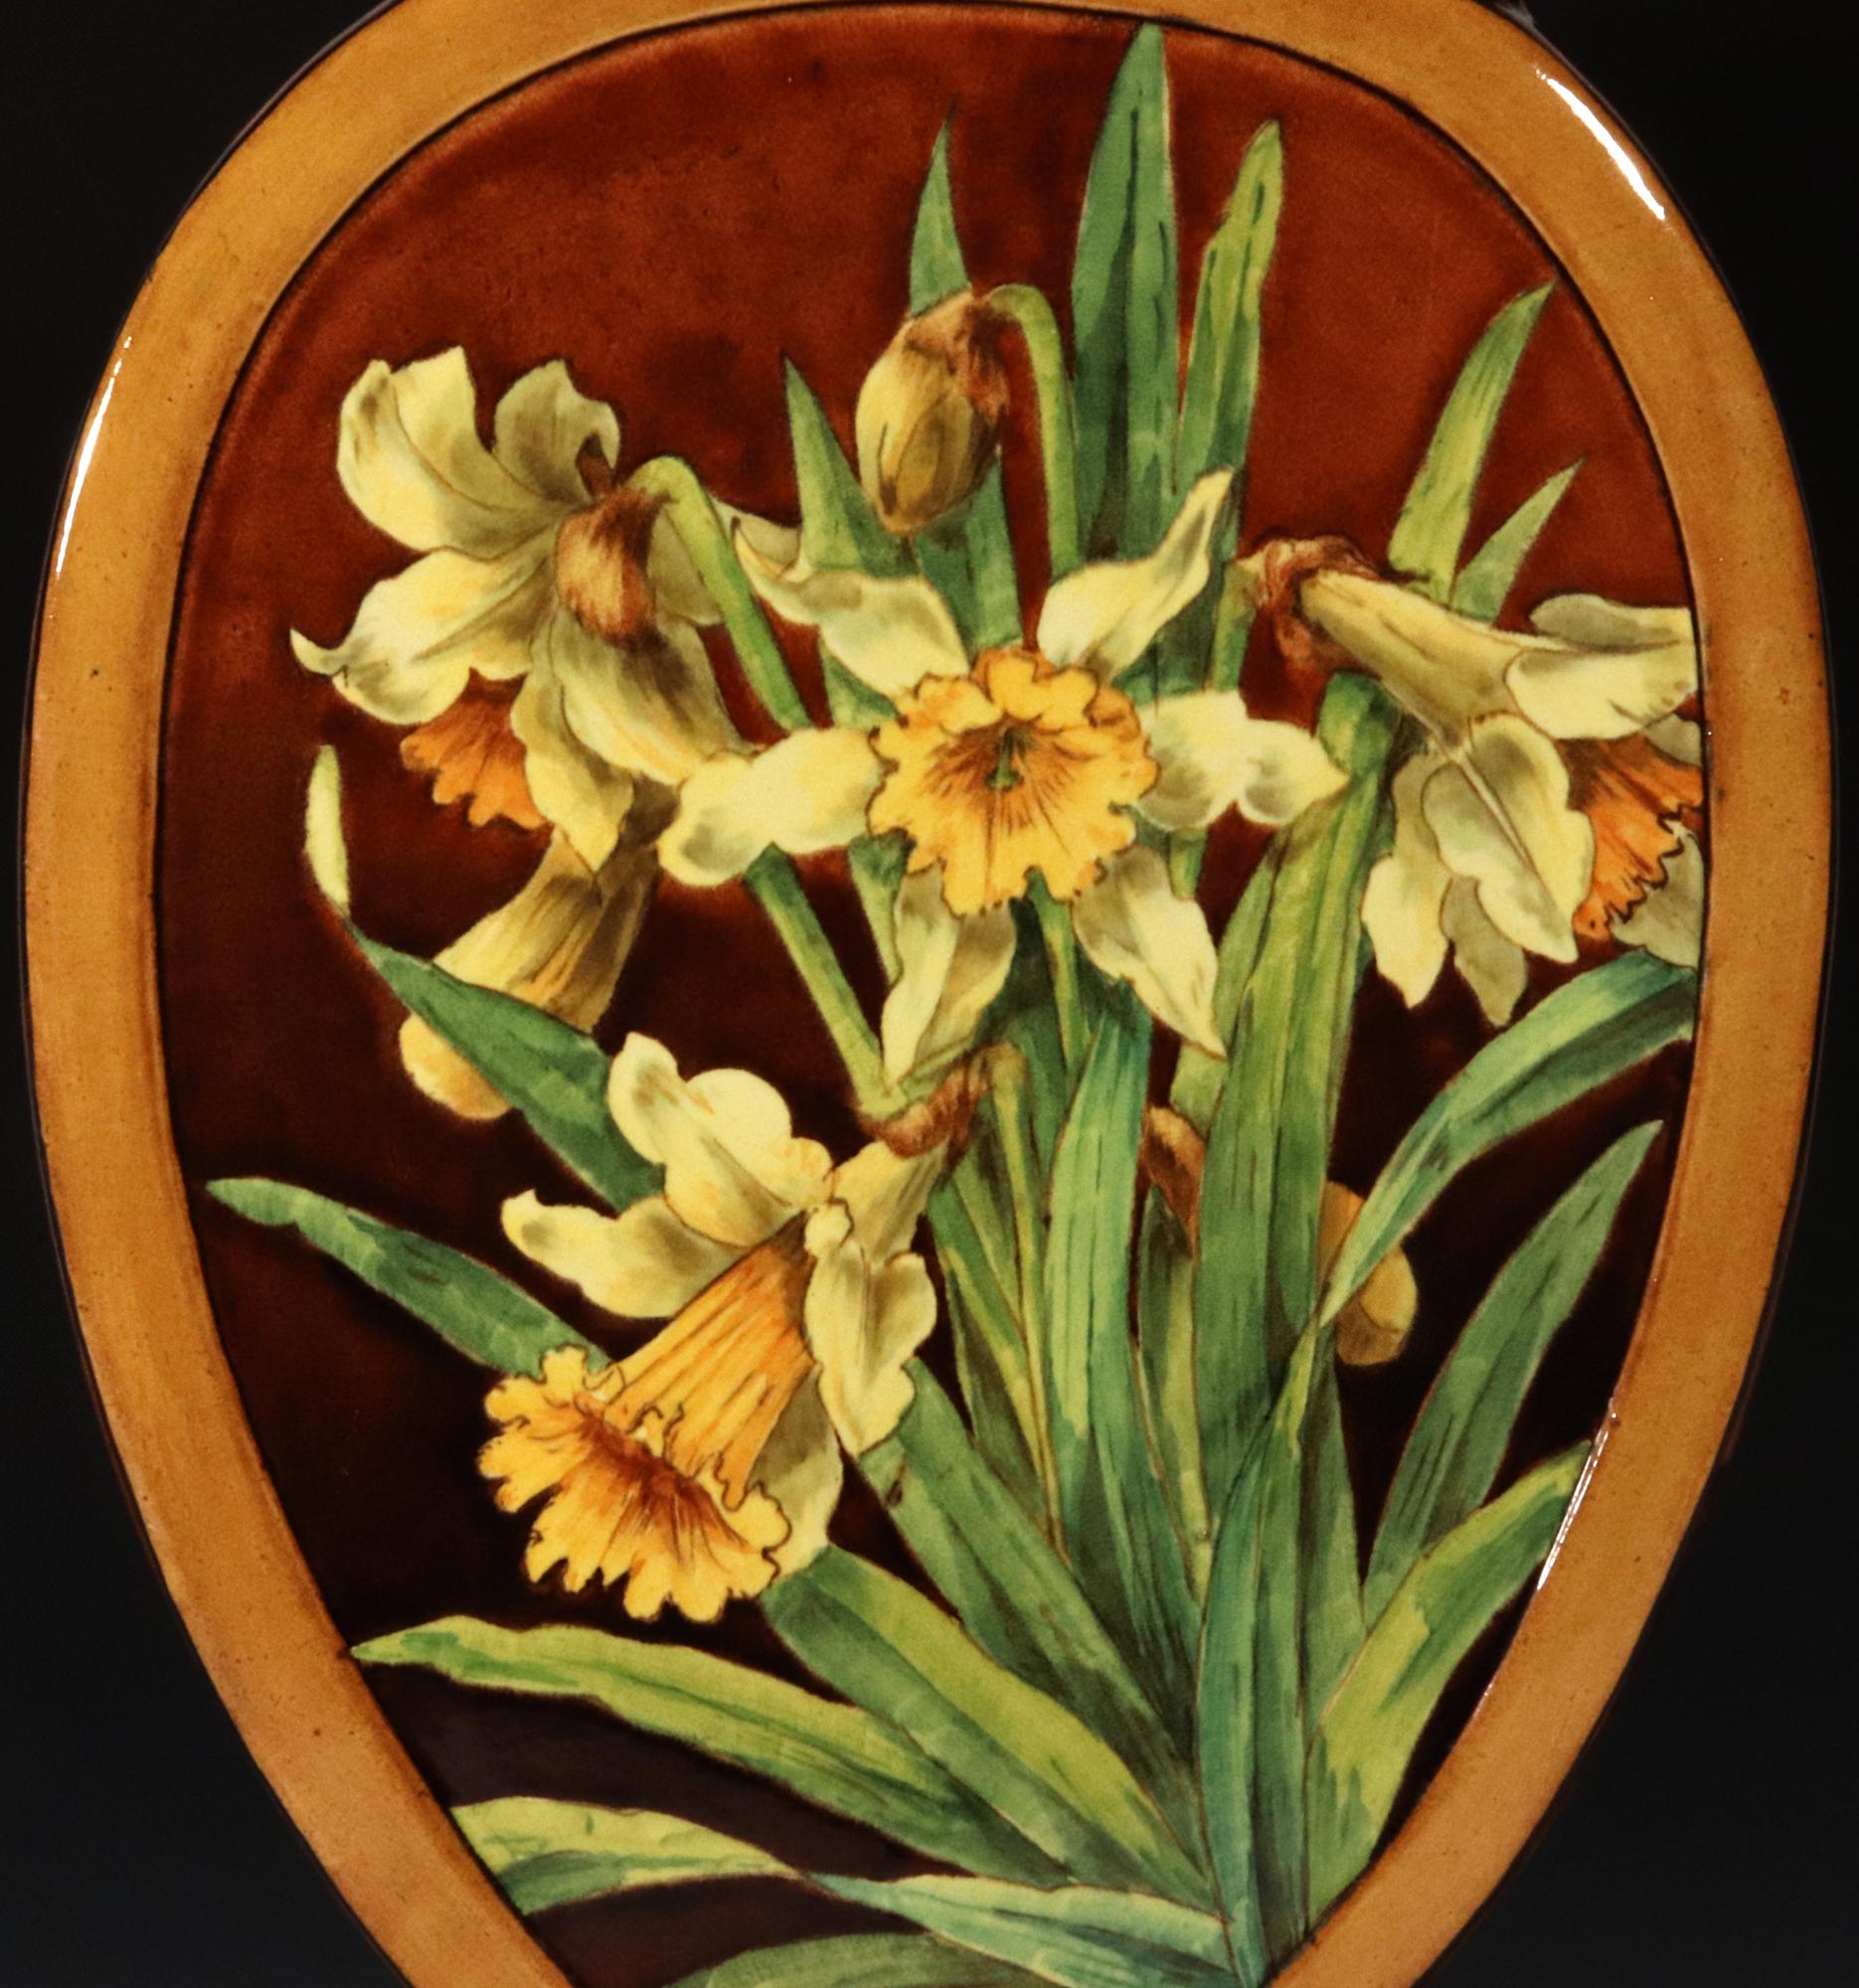 Doulton Faience Shaped Botanical Pottery Vase Signed by Artist Mary M Arding In Good Condition For Sale In Downingtown, PA